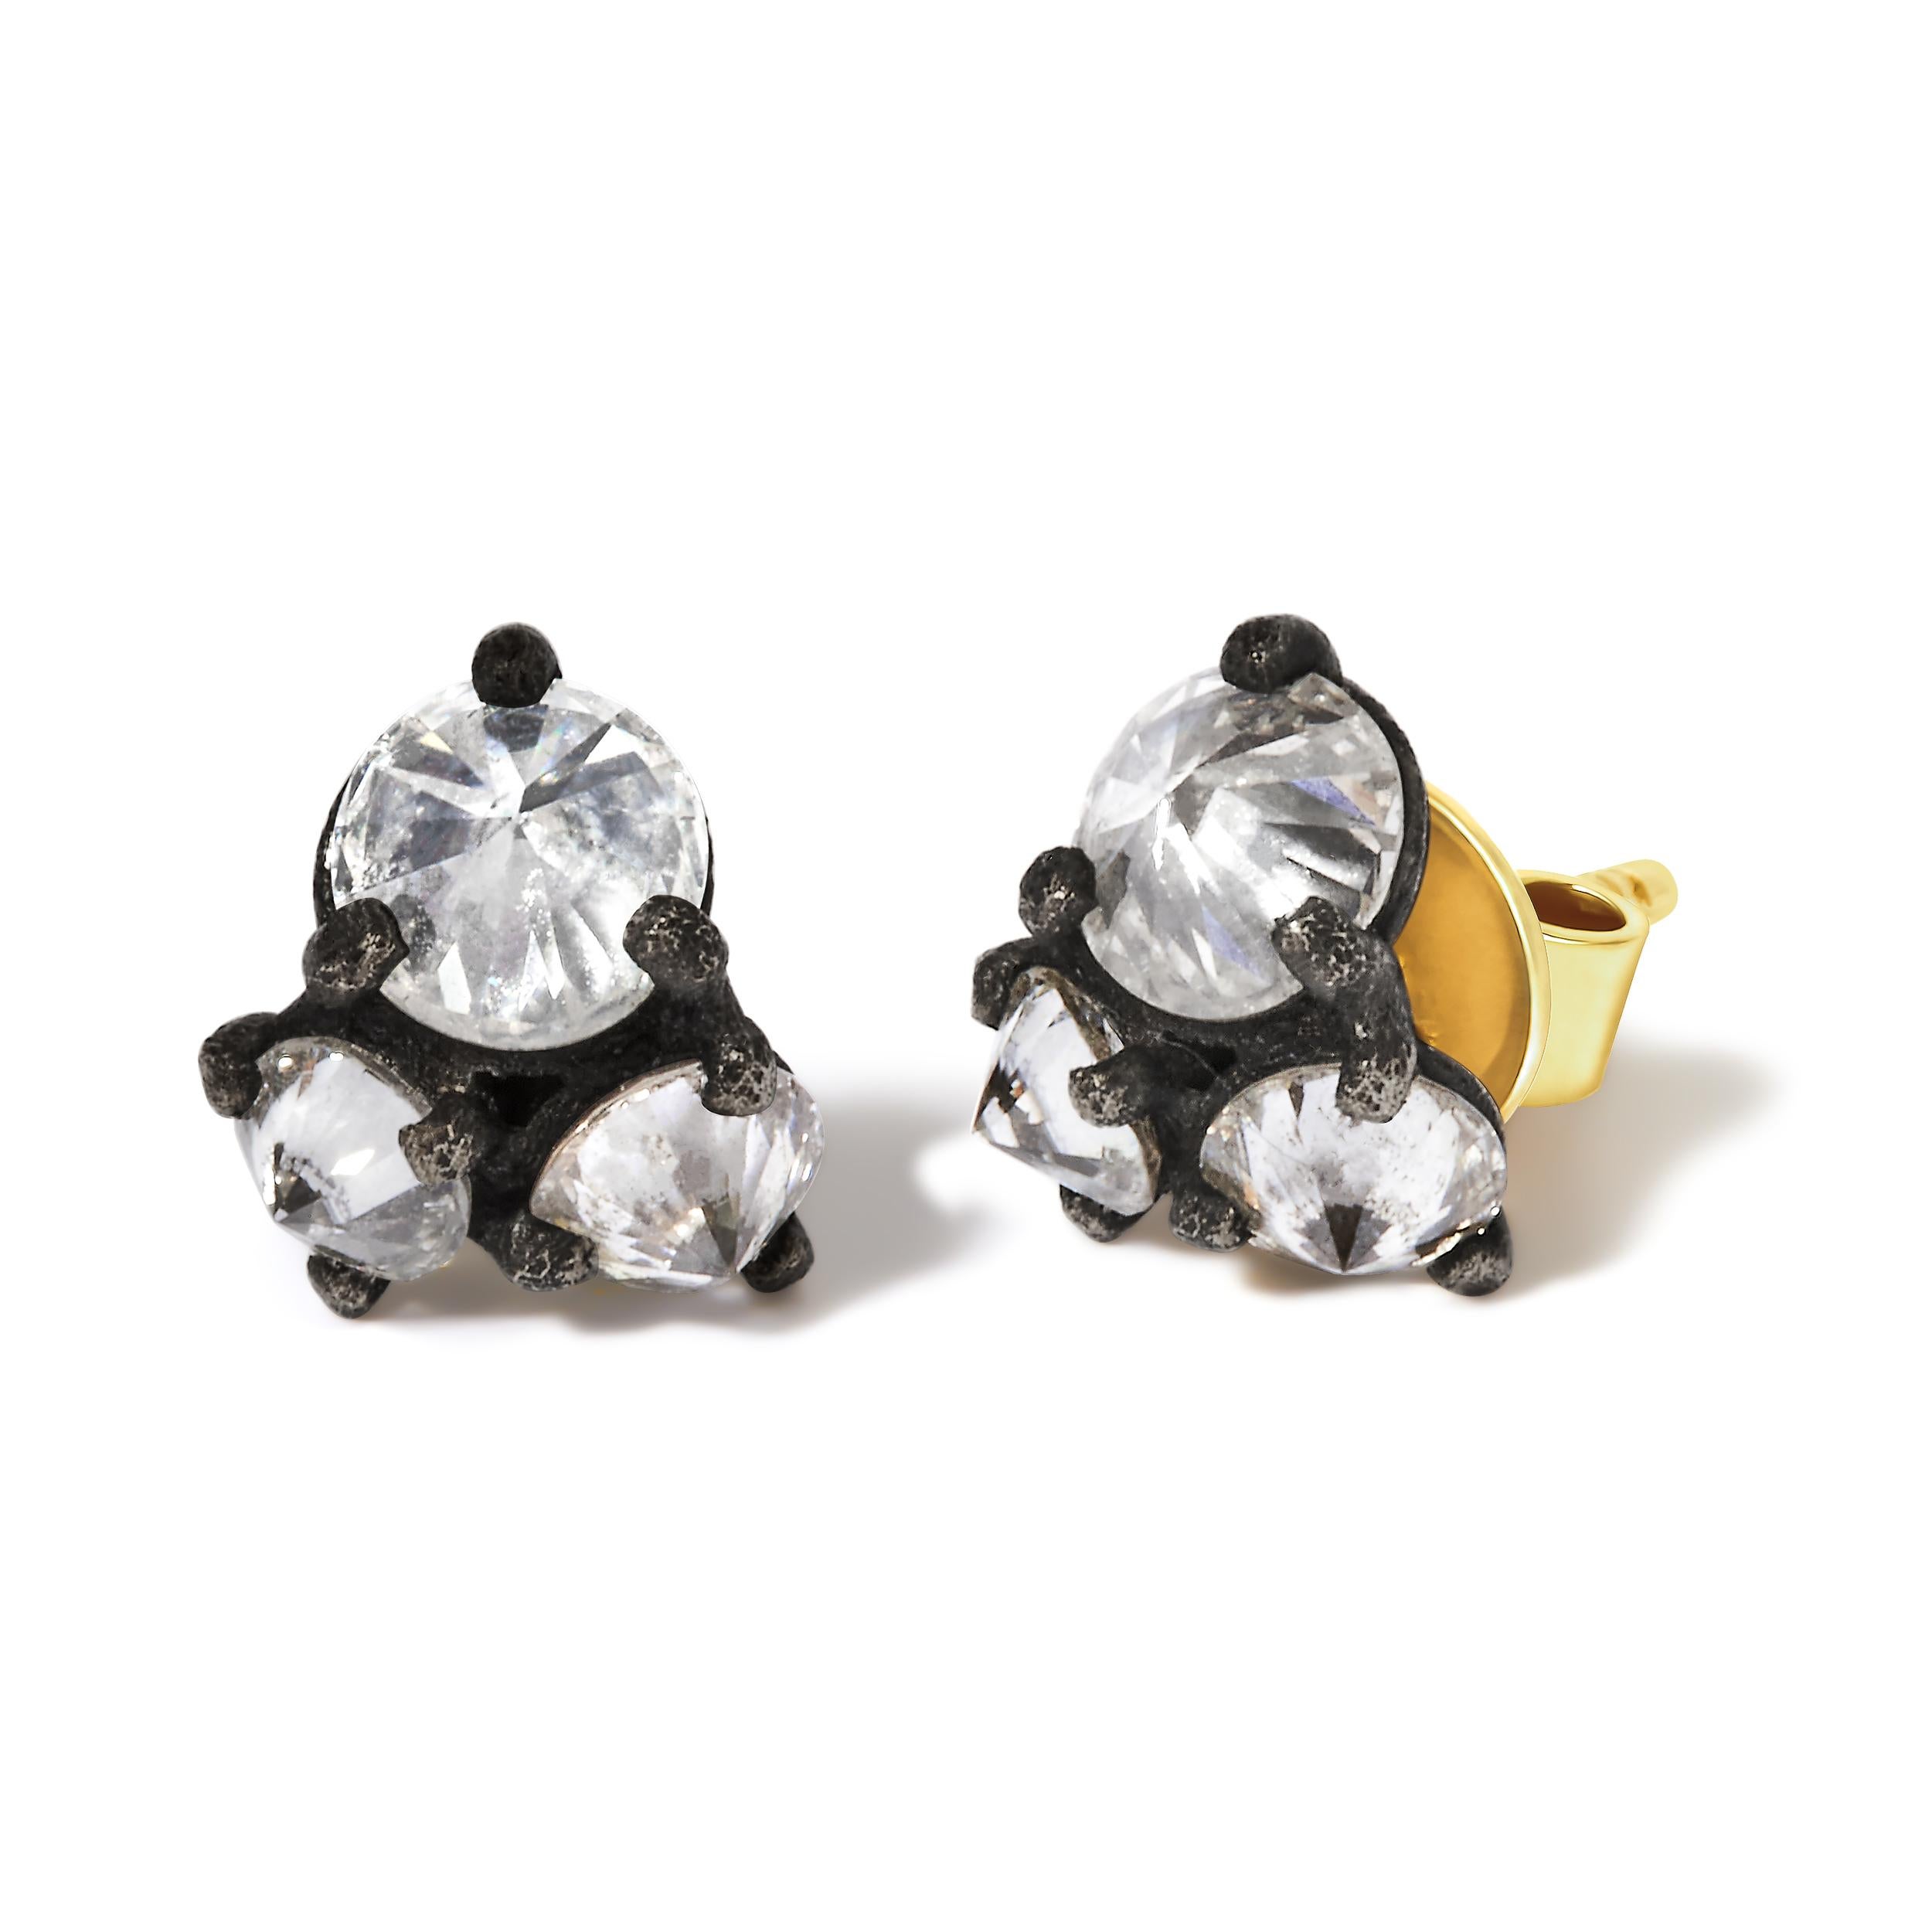 Indulge in the allure of timeless sophistication with our stunning 14K Yellow Gold and Black Oxidized Reverse Set Diamond Trio Stud Earrings. Featuring a total diamond weight of 1 1/4 cttw and 6 dazzling round diamonds, these earrings are a true